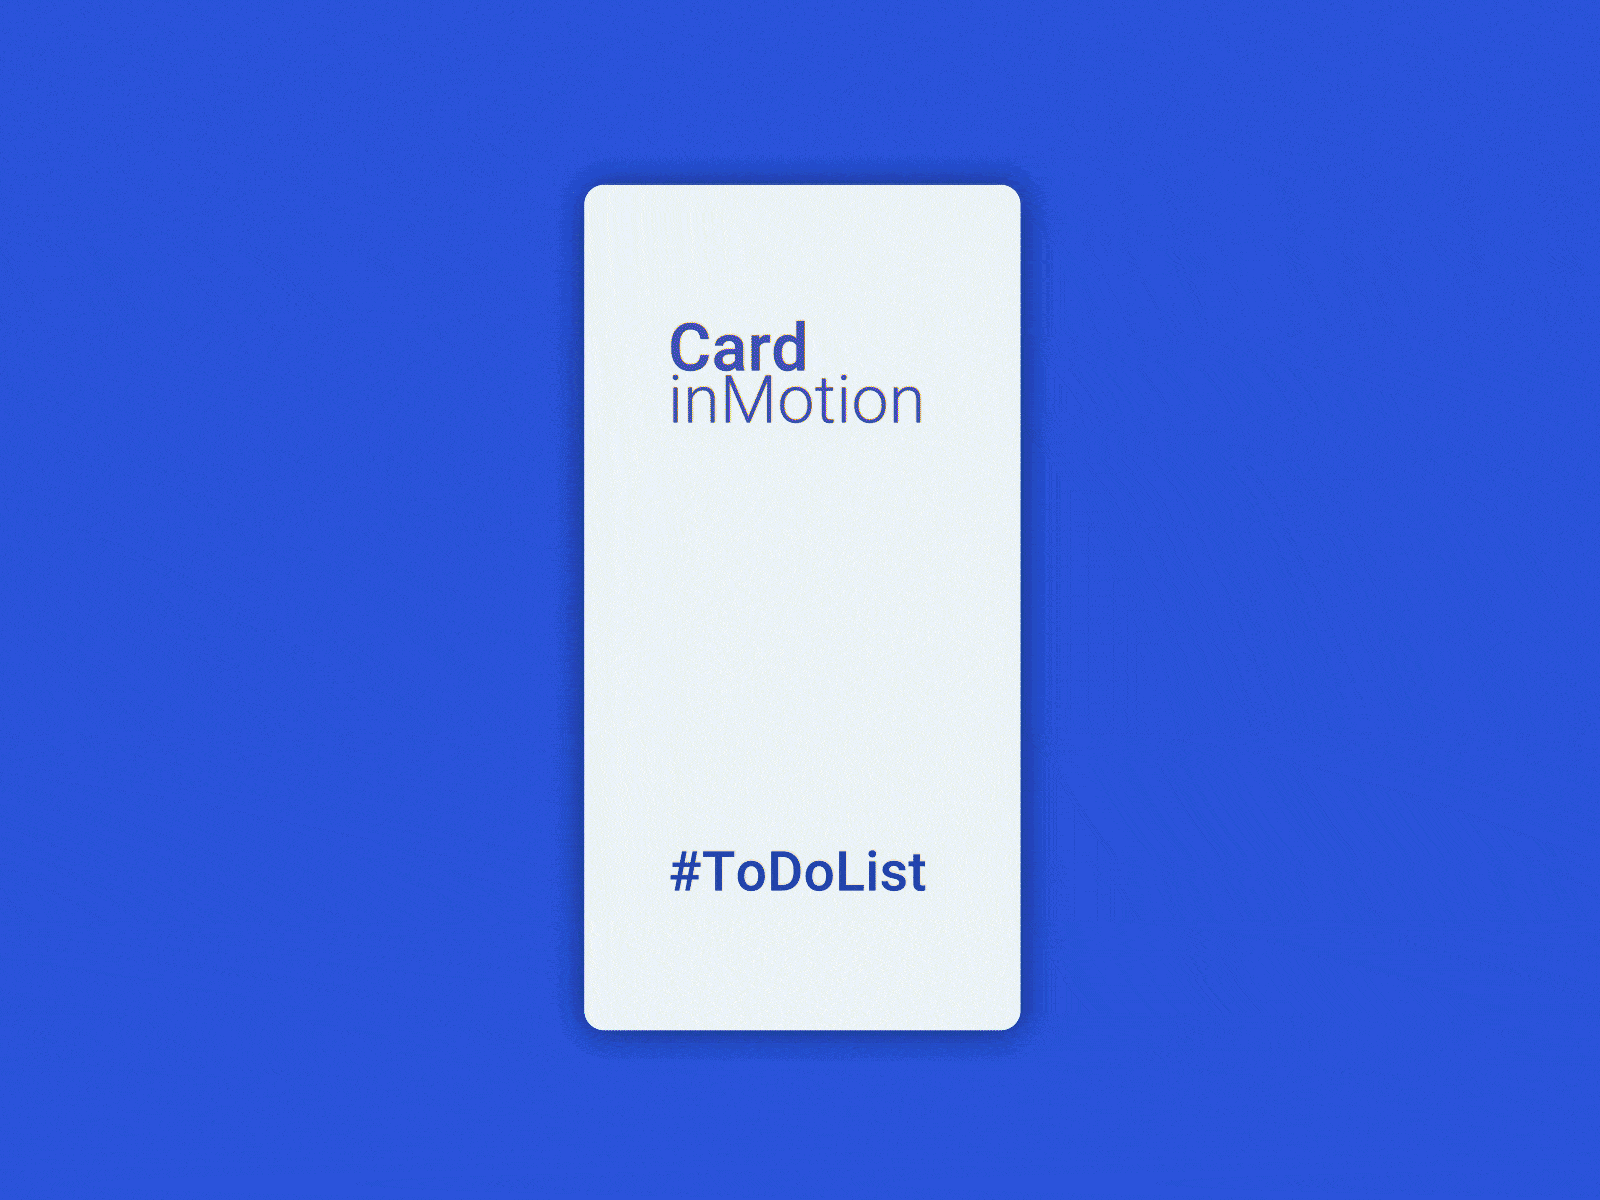 Card micro interaction experiment #2 2d animation card design experiment microinteraction mobile motion todolist ui ux vector